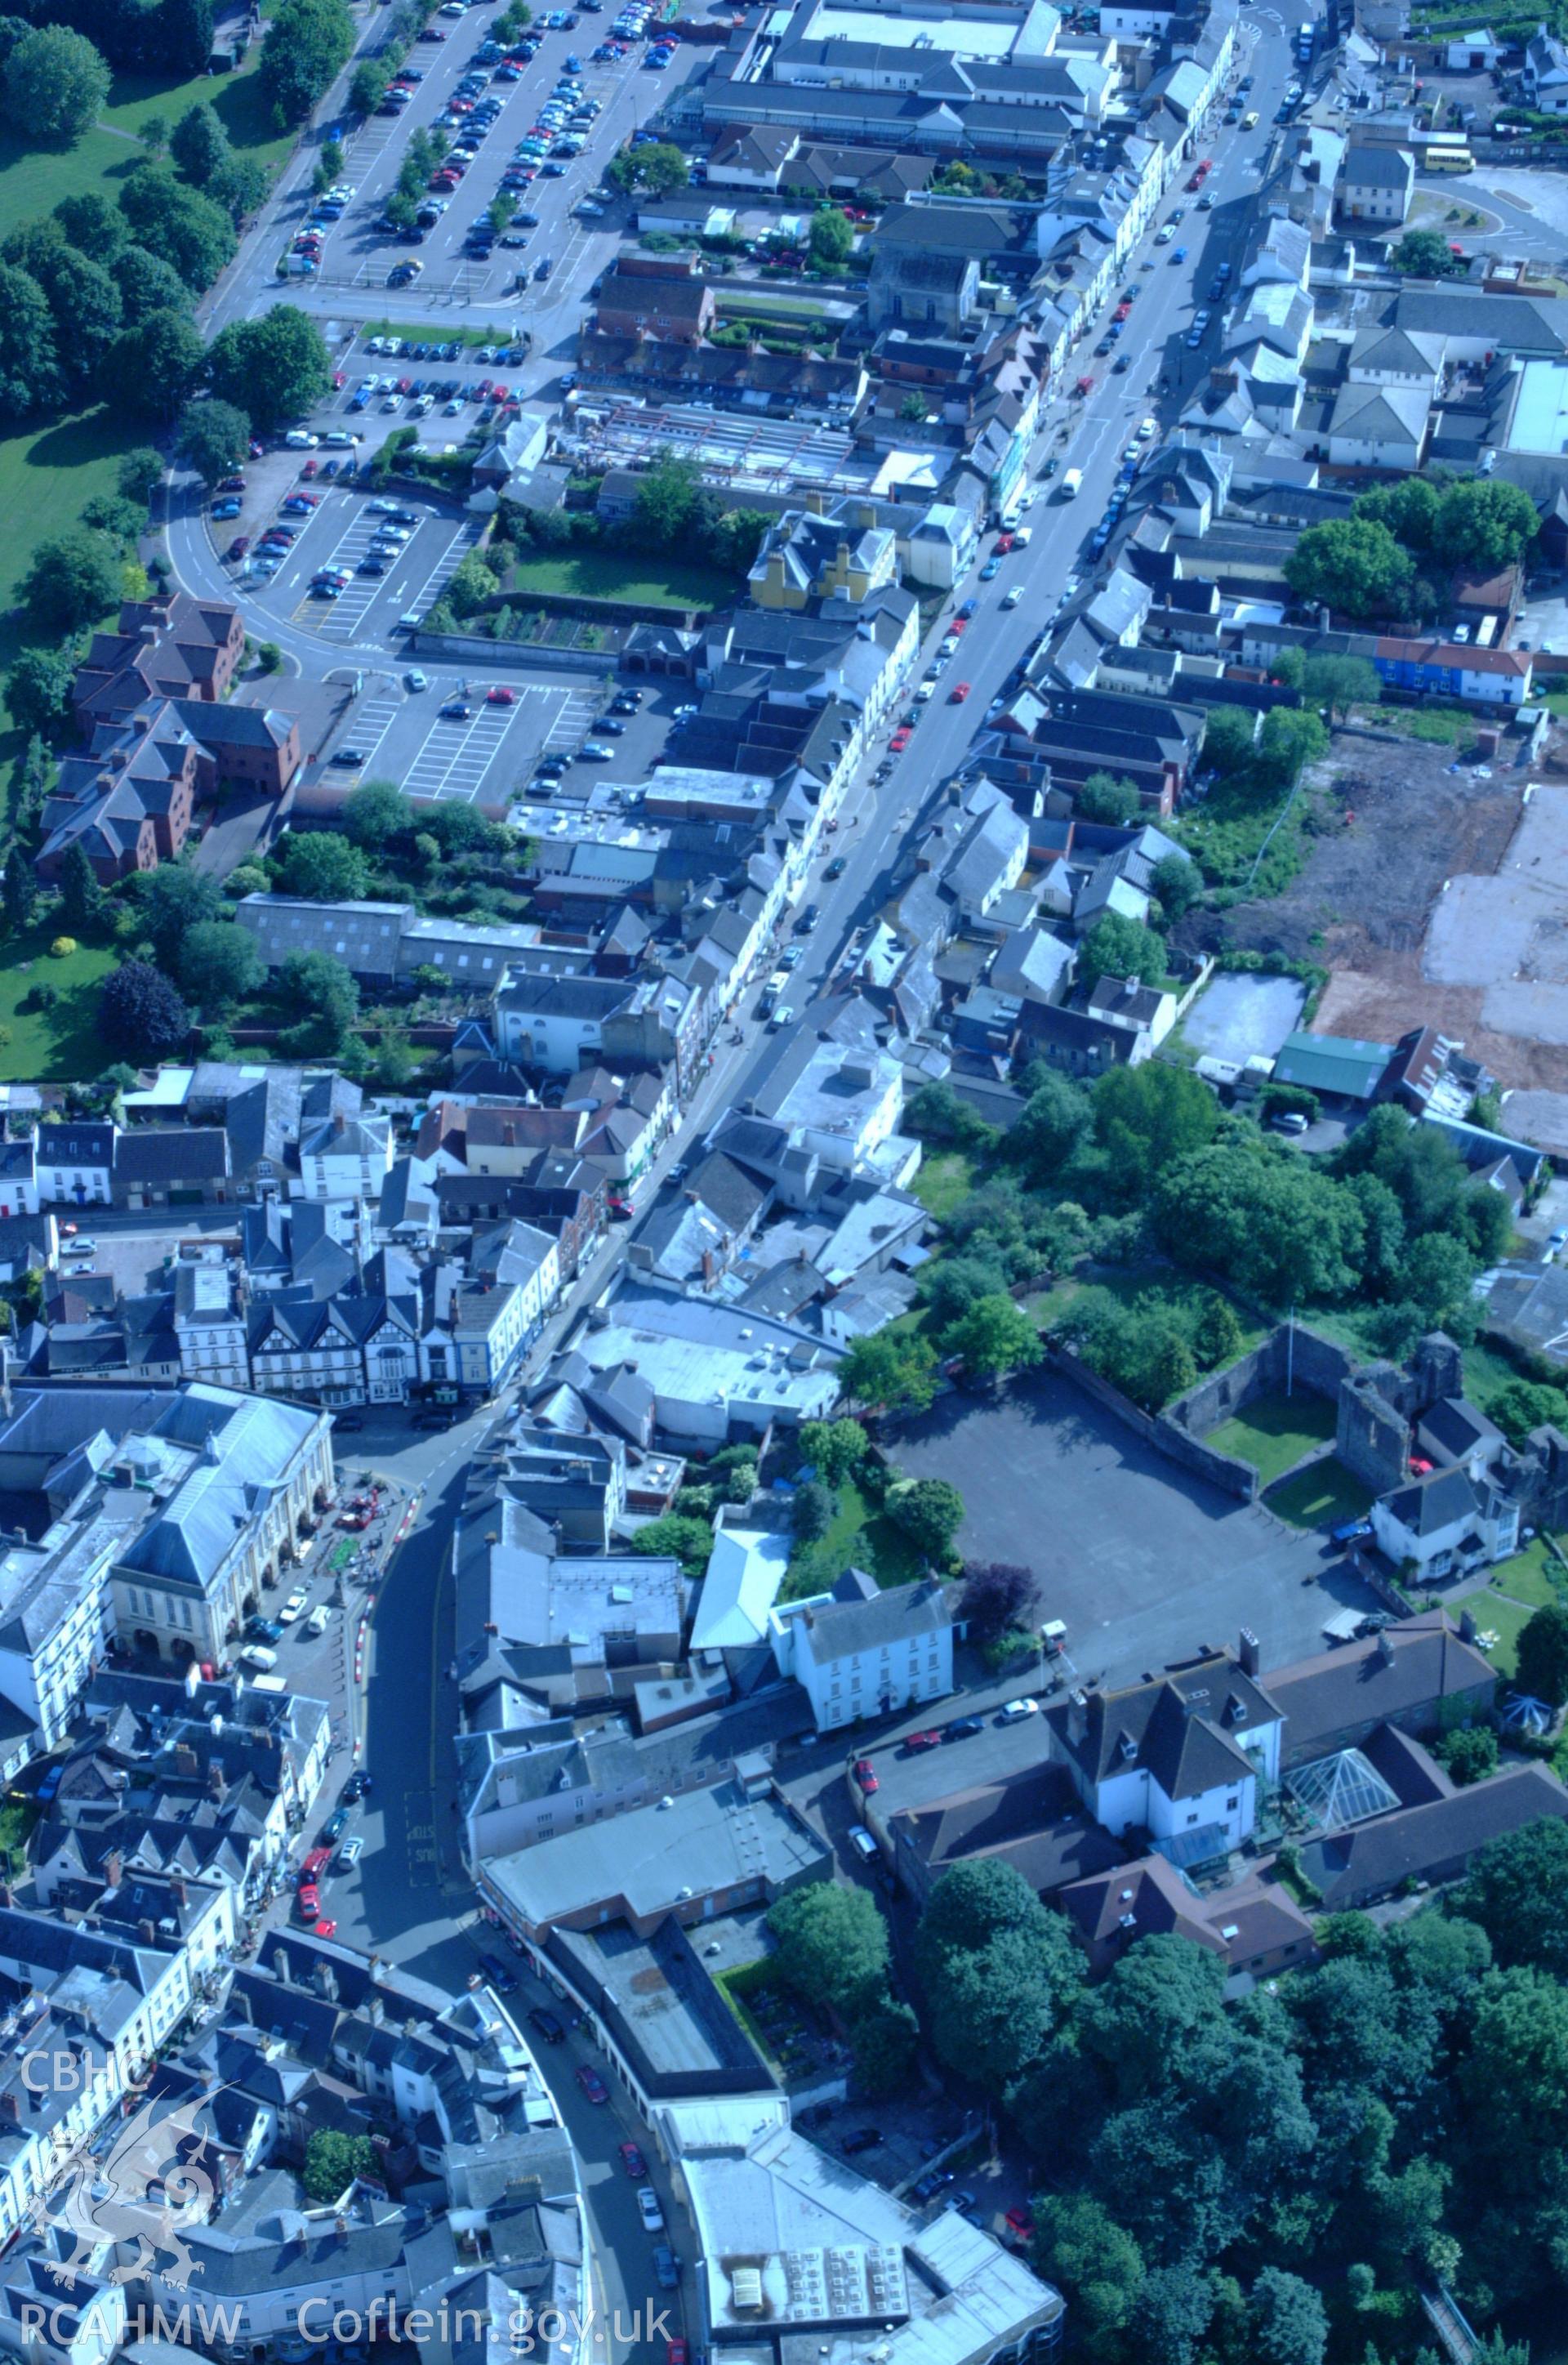 RCAHMW colour oblique aerial photograph of Monnow St., Monmouth. Taken on 02 June 2004 by Toby Driver